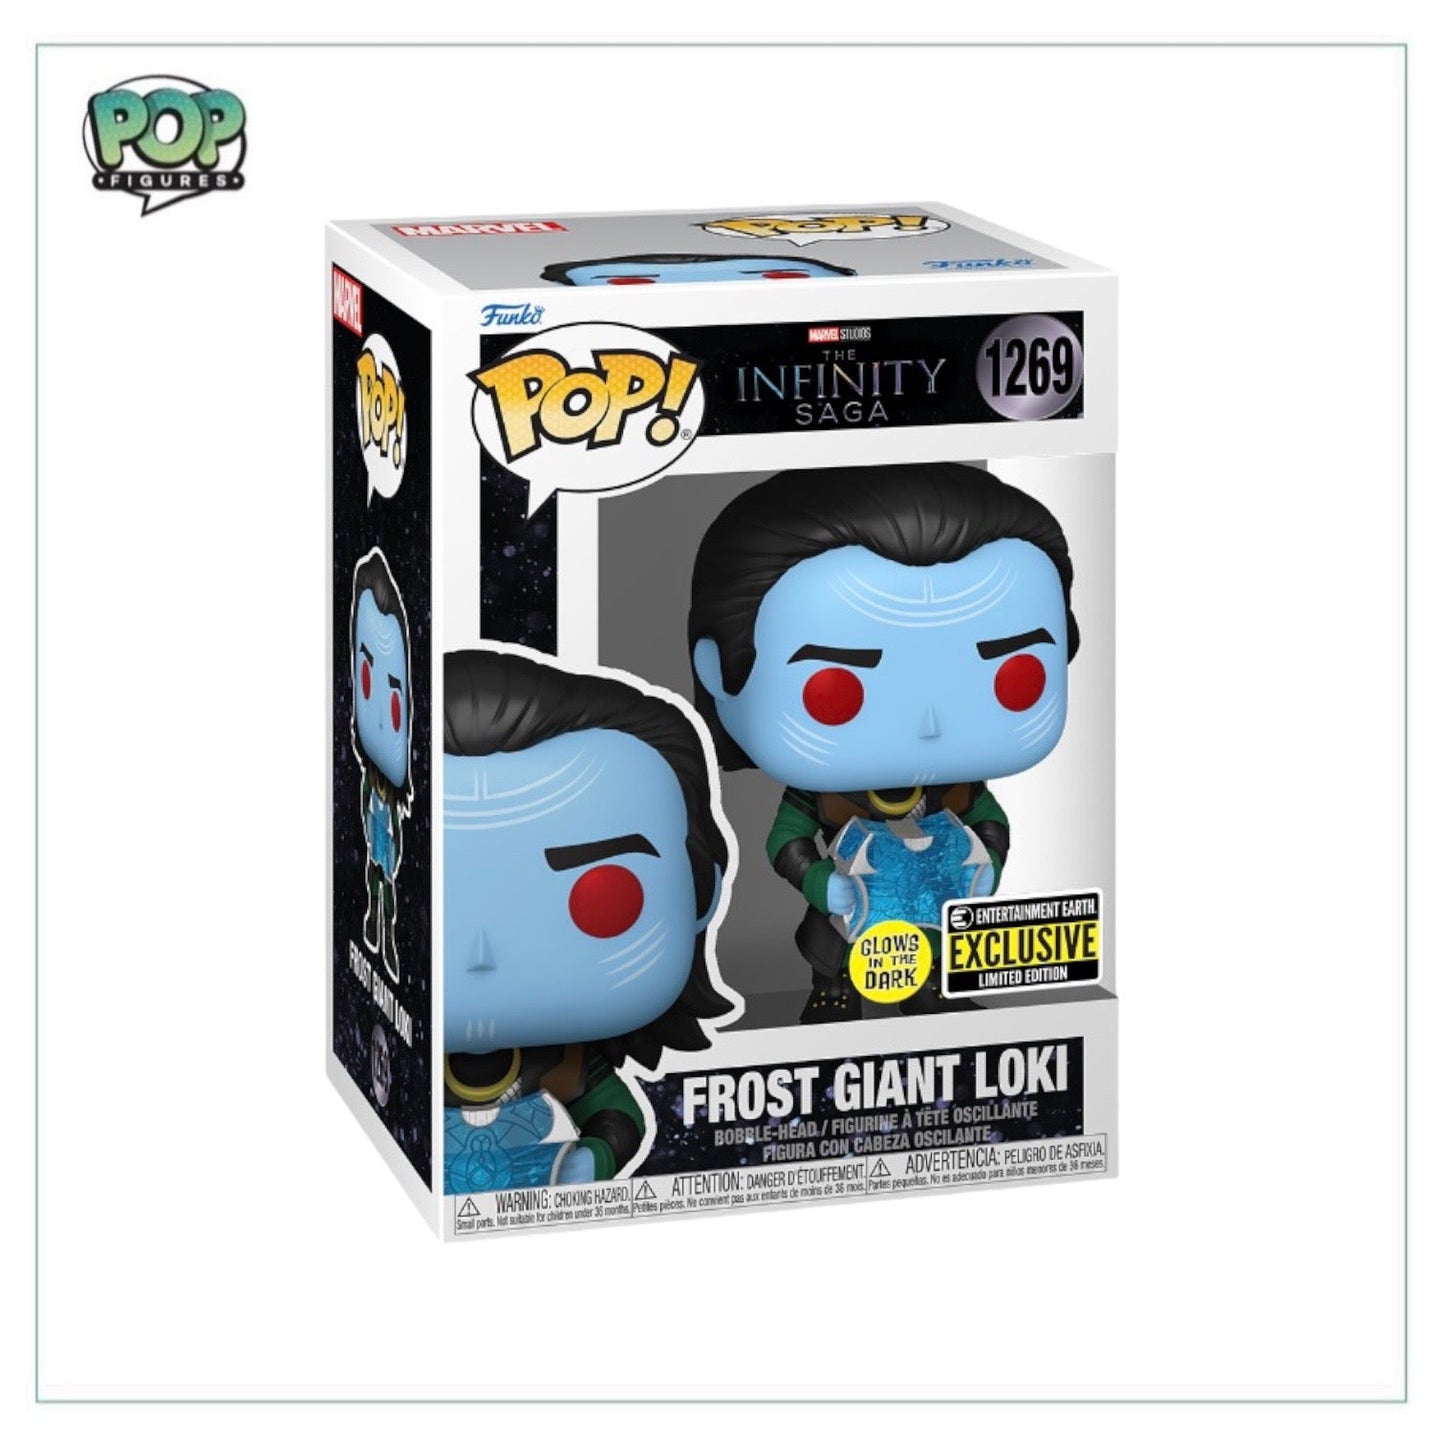 Frost Giant Loki #1269 (Glows in the Dark) Funko Pop! - Infinity Saga - Entertainment Earth Exclusive - Angry Cat